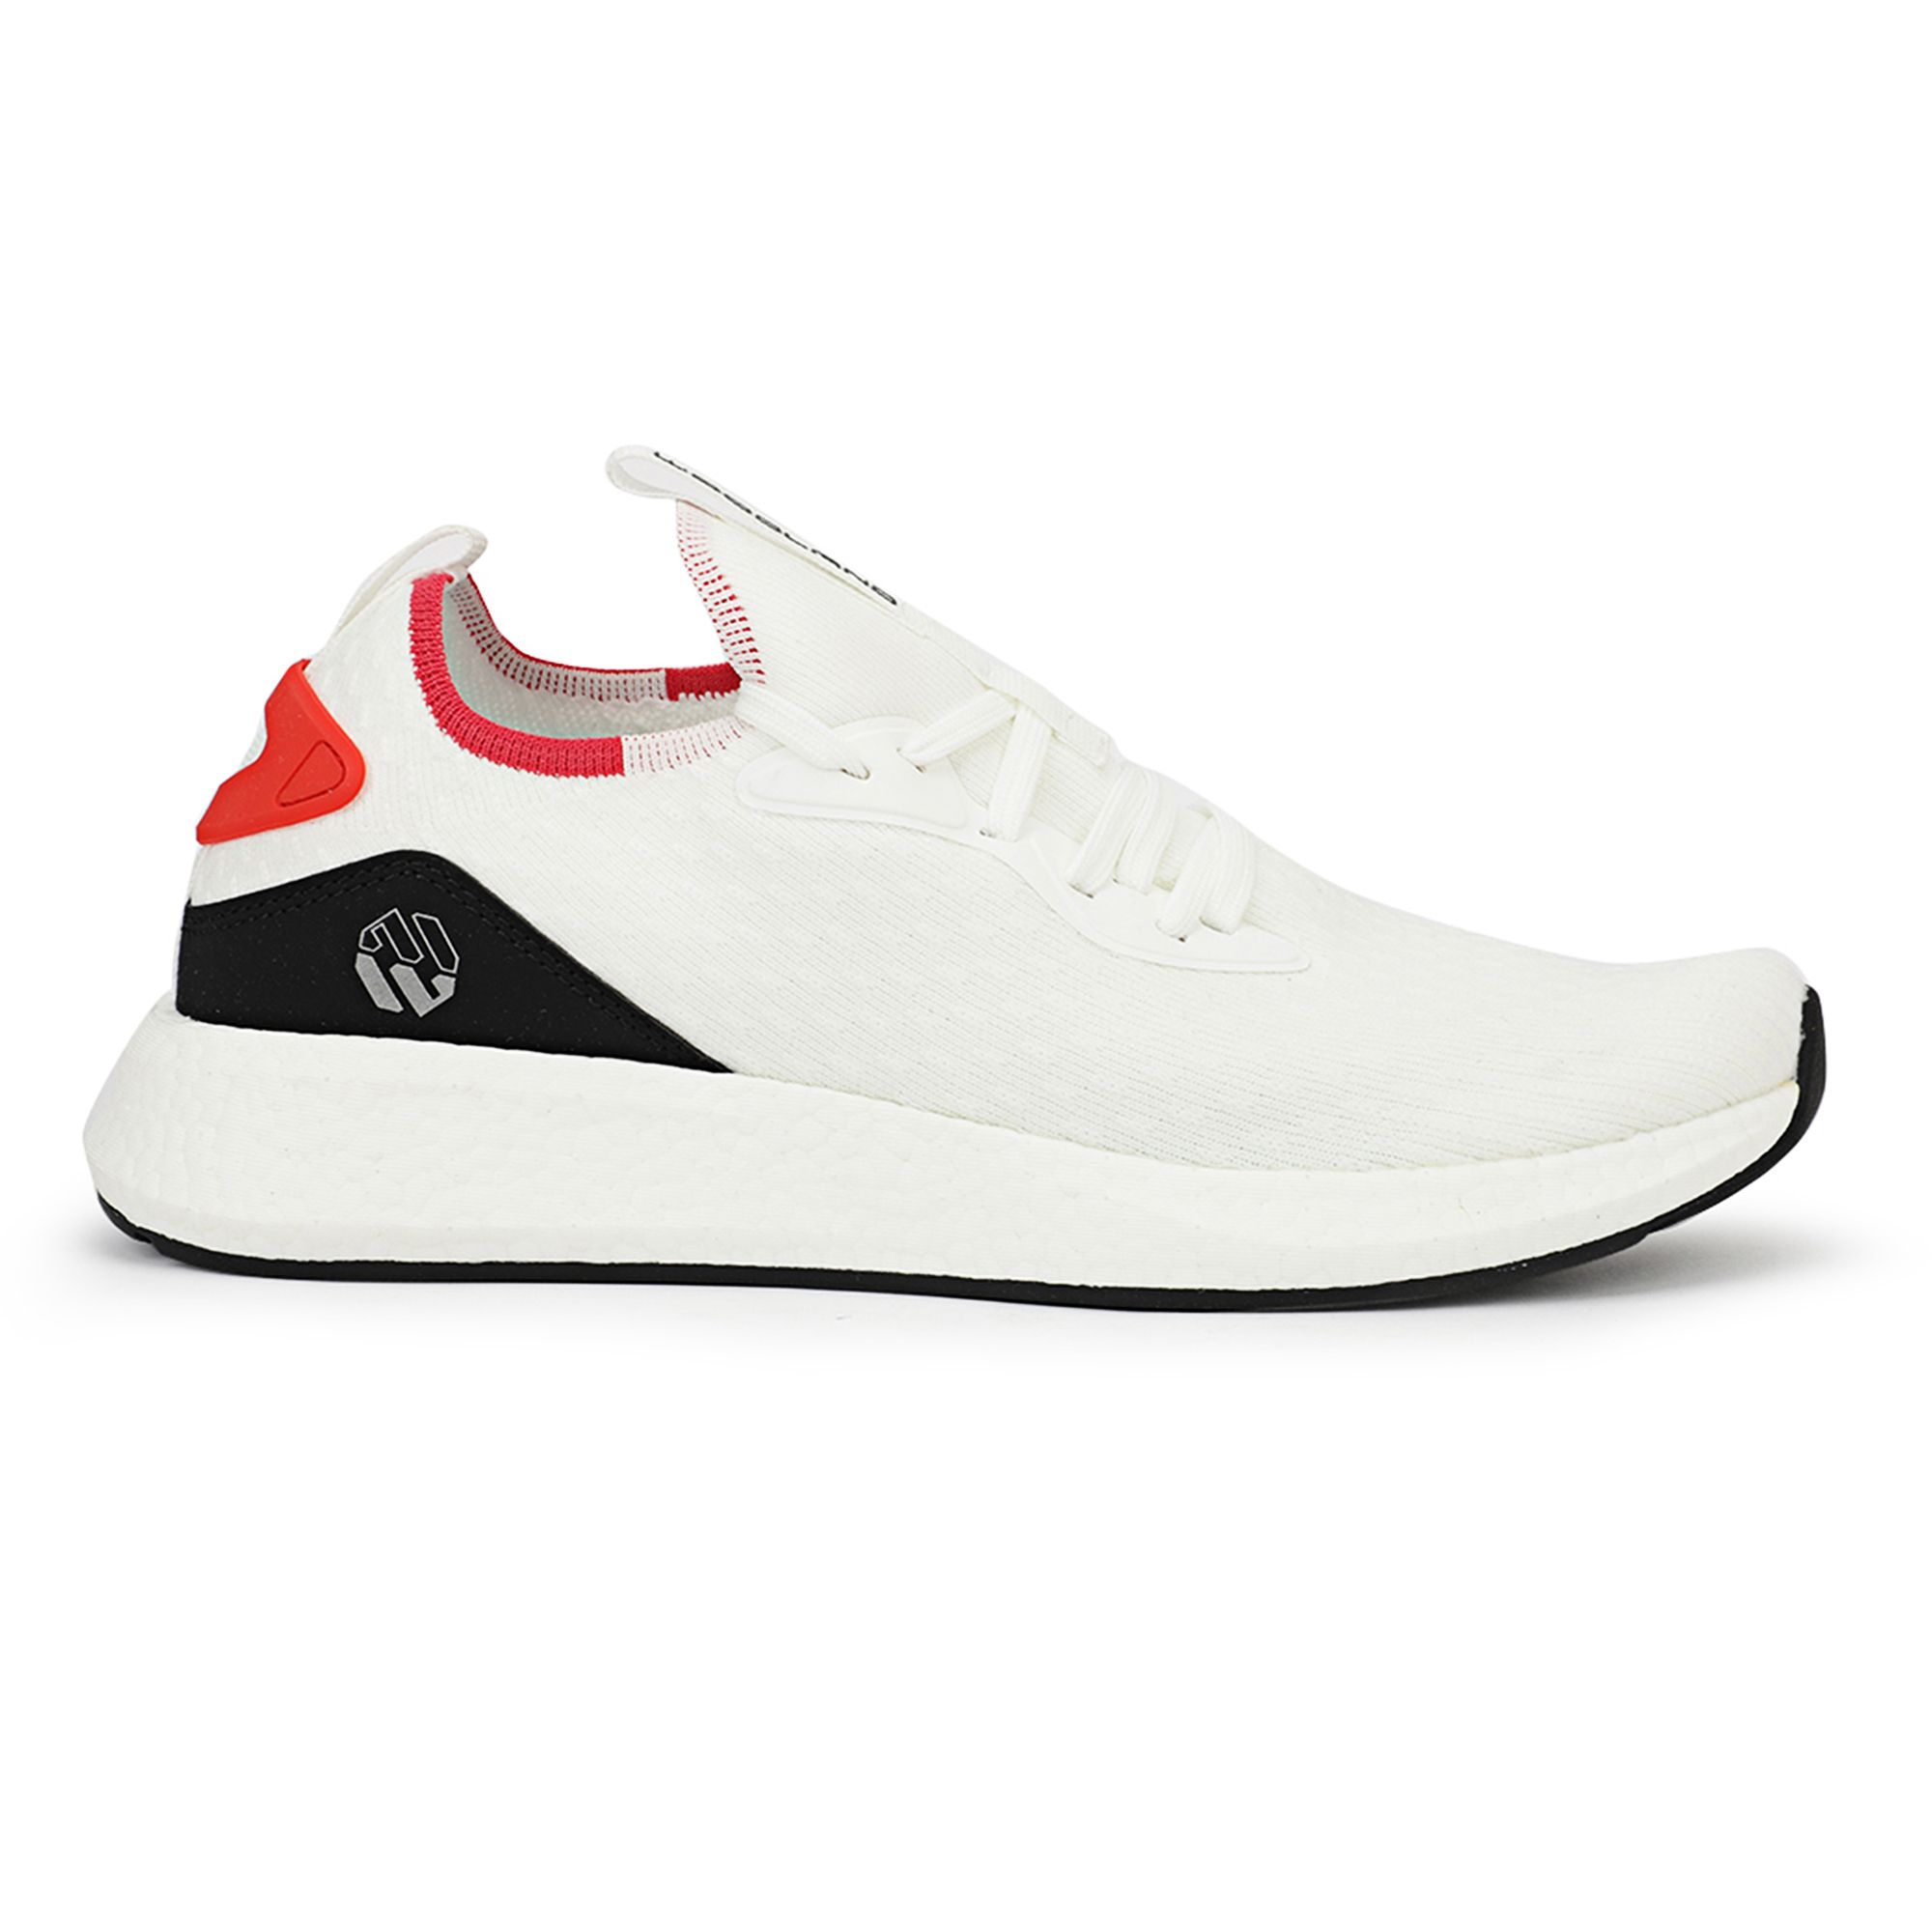 Buy Action Men White Running Shoes - Sports Shoes for Men 6685643 | Myntra